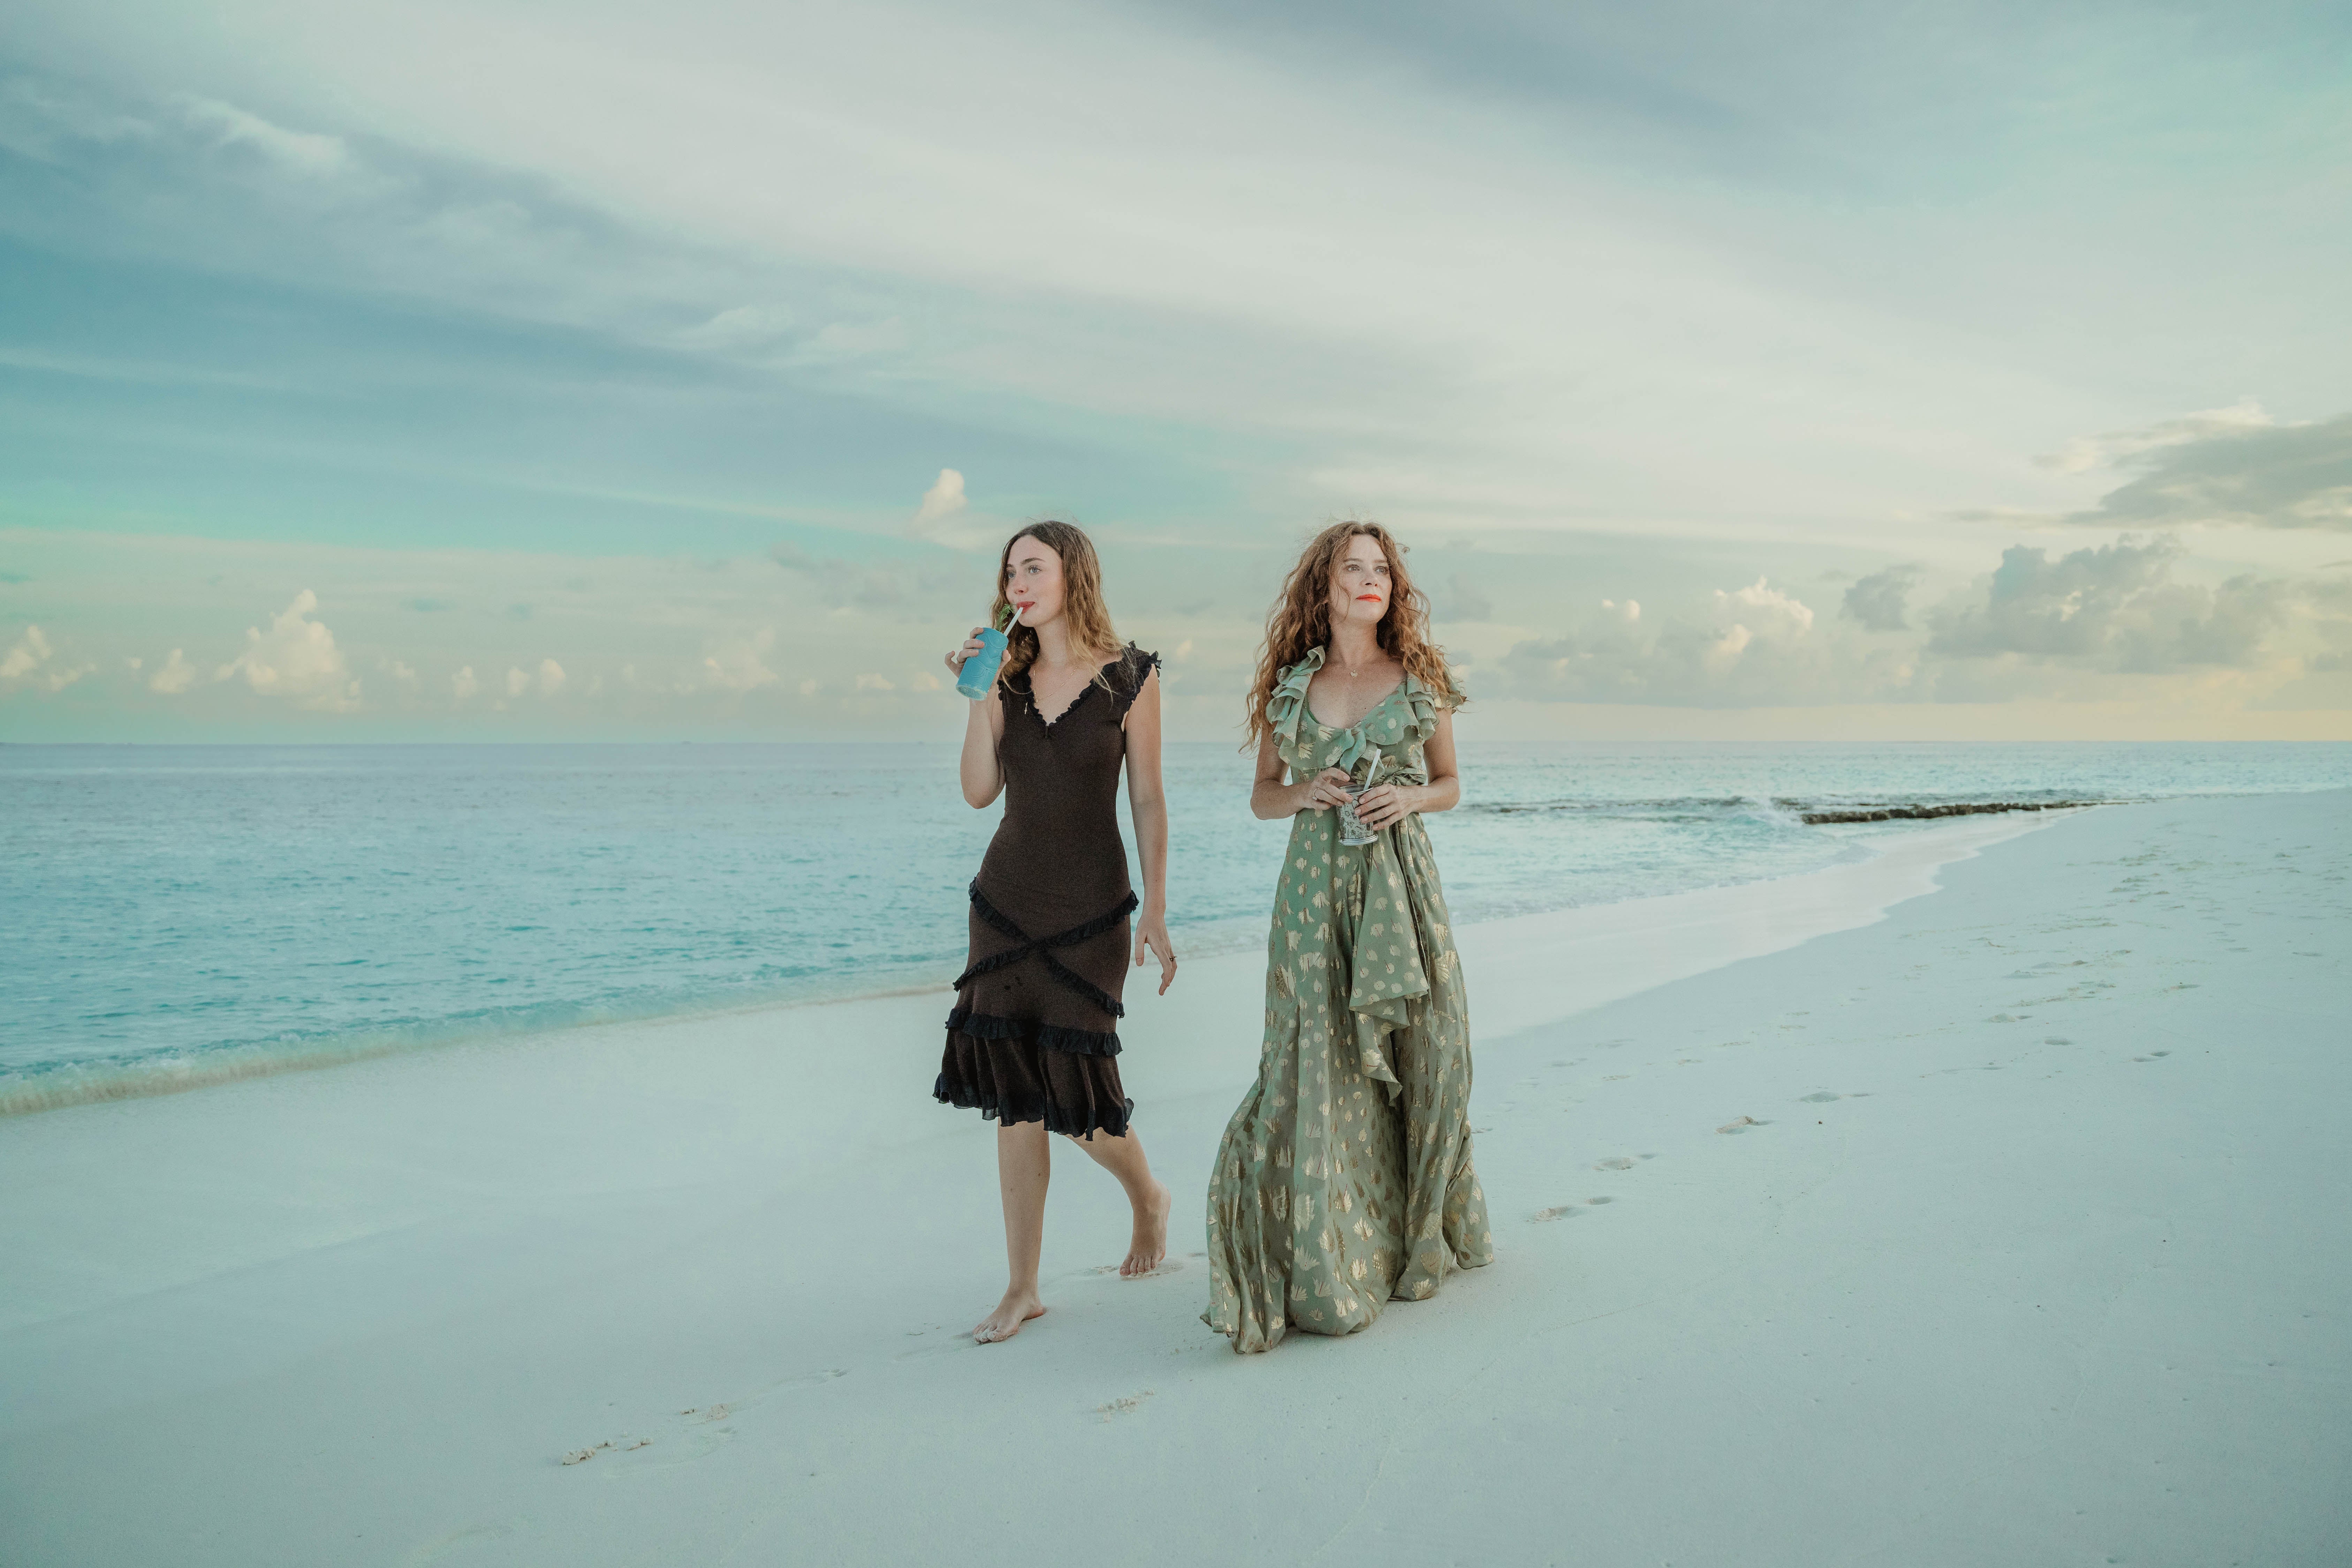 Anna Friel and her daughter Gracie took one last travel adventure to The Maldives before university